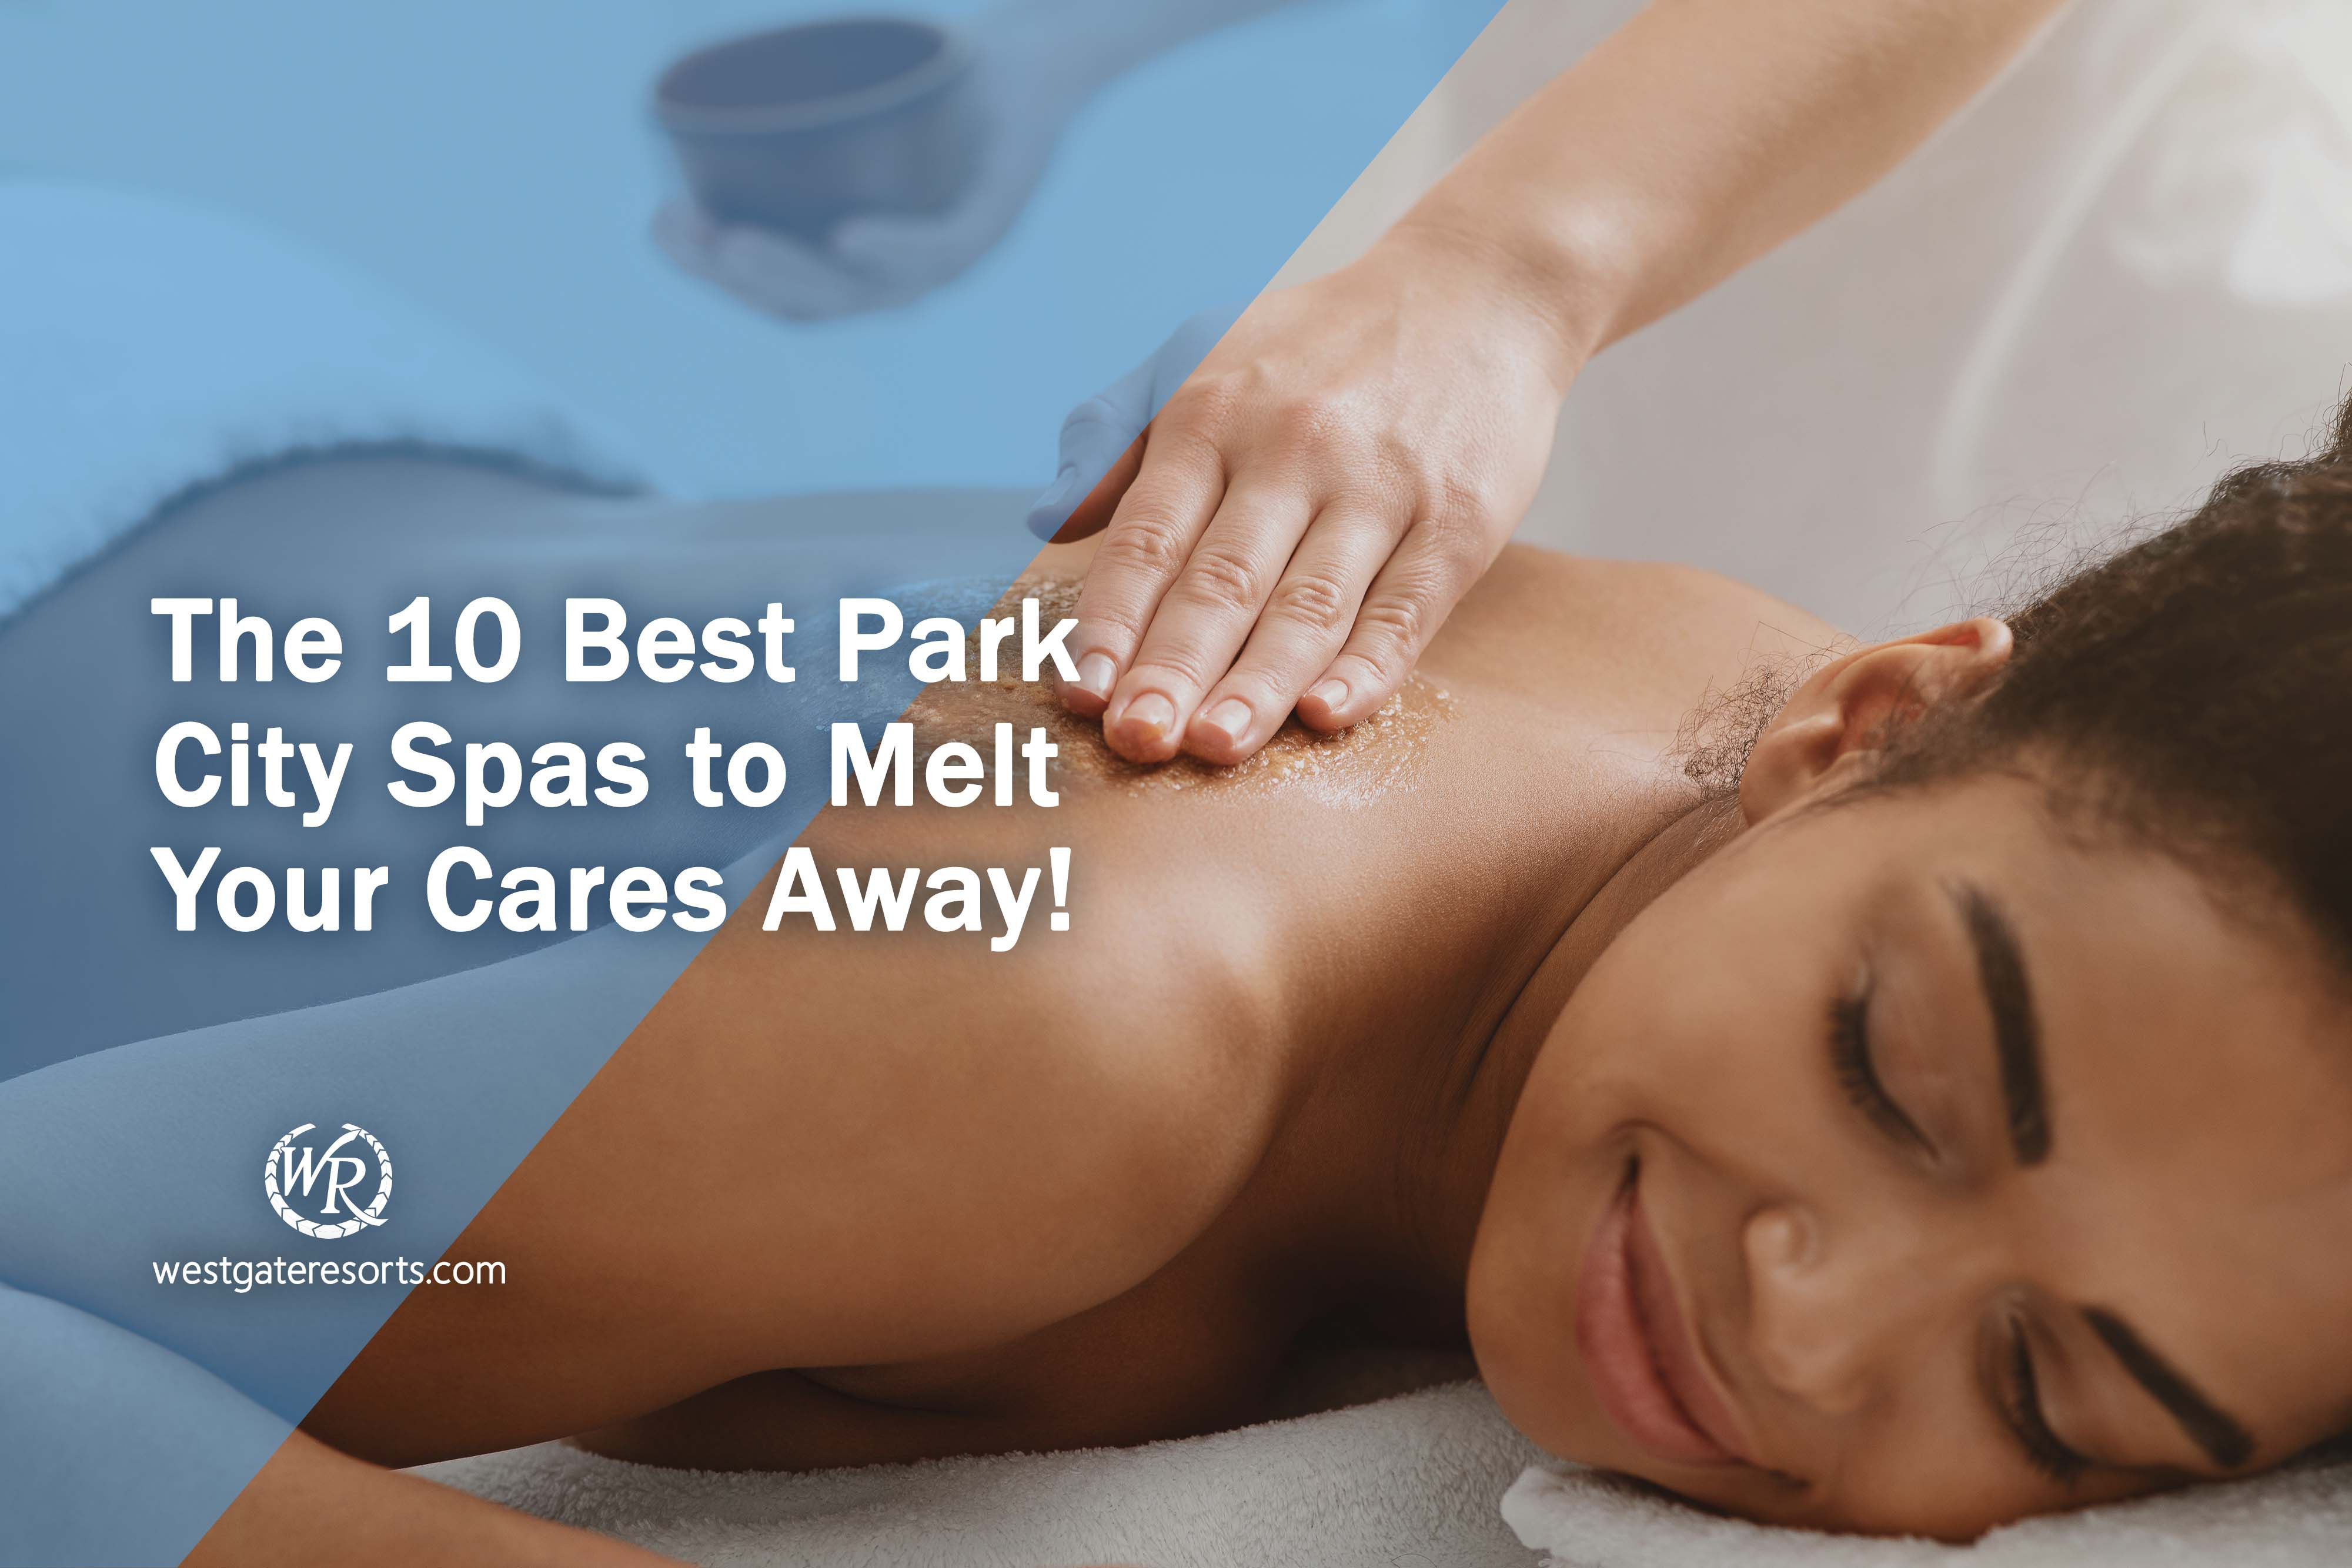 The 10 Best Park City Spas to Melt Your Cares Away!